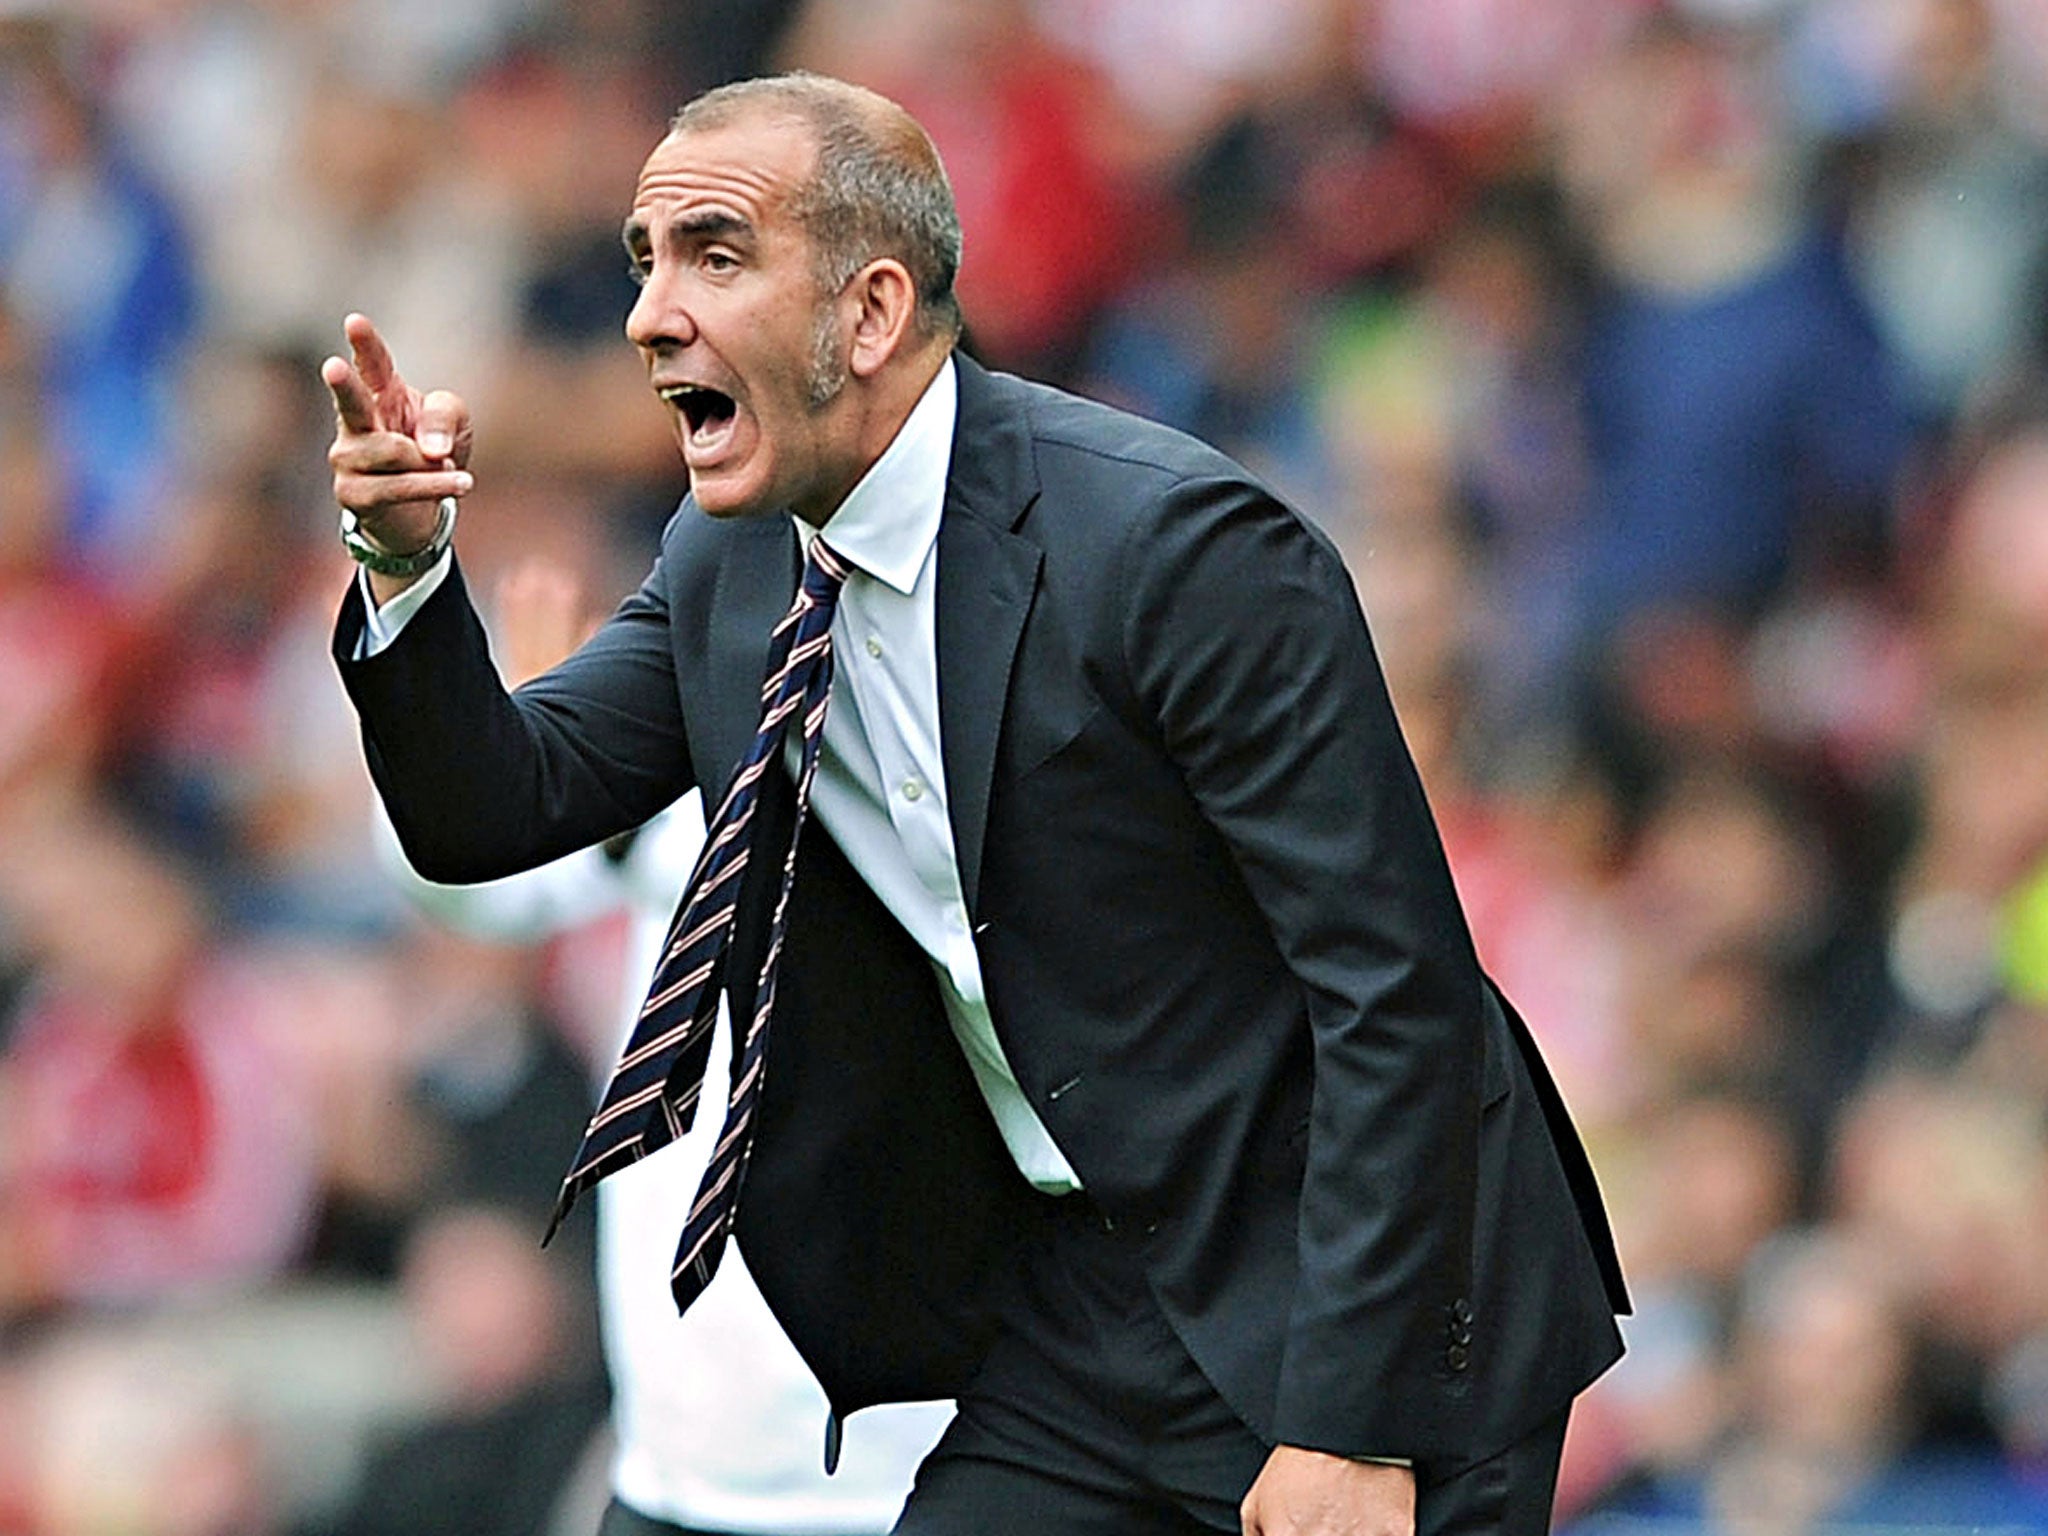 Paolo Di Canio's agent says he would like to take the vacant Celtic post